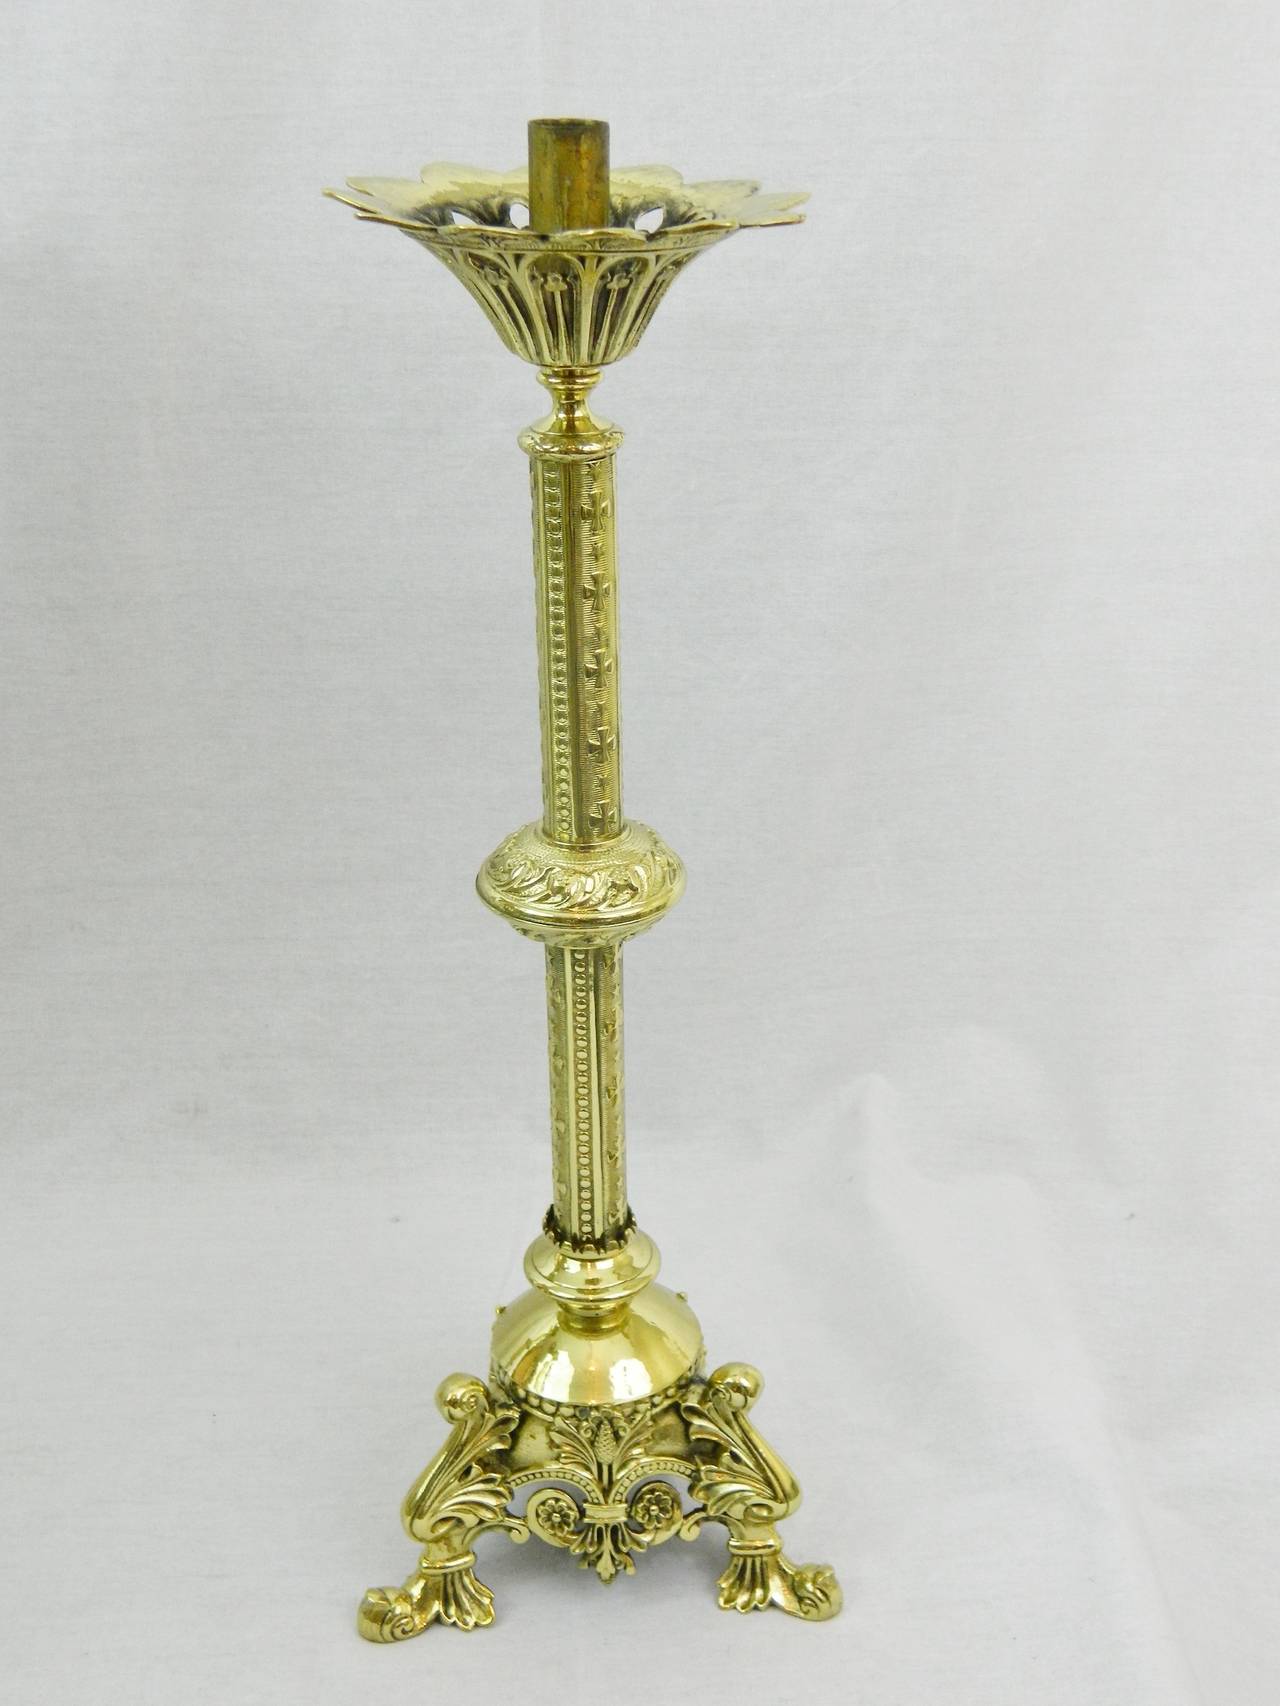 19th Century Polished Brass Decorative Prickets or Candlesticks 6